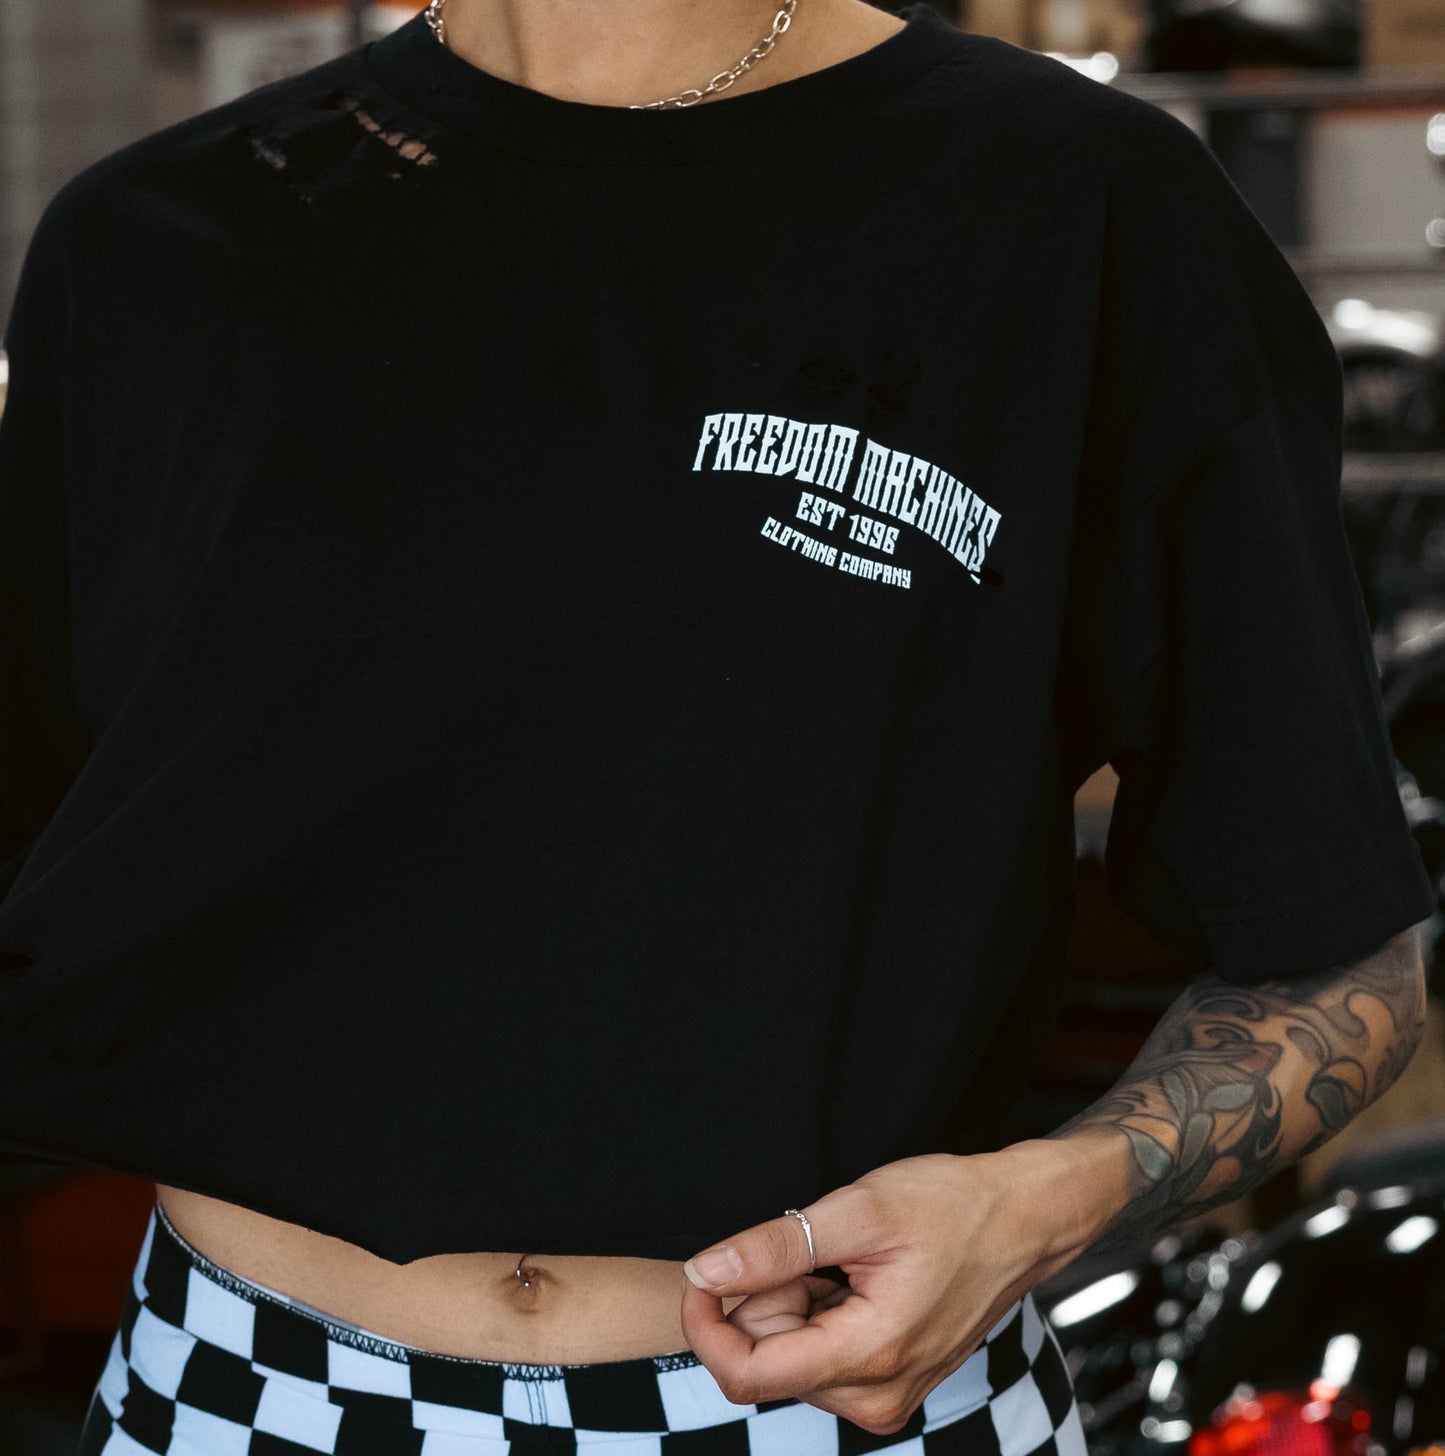 Hand distressed black crop top for women. Picture is taken in a motorcycle garage.  Front of shirt showing says "Freedom Machines" 